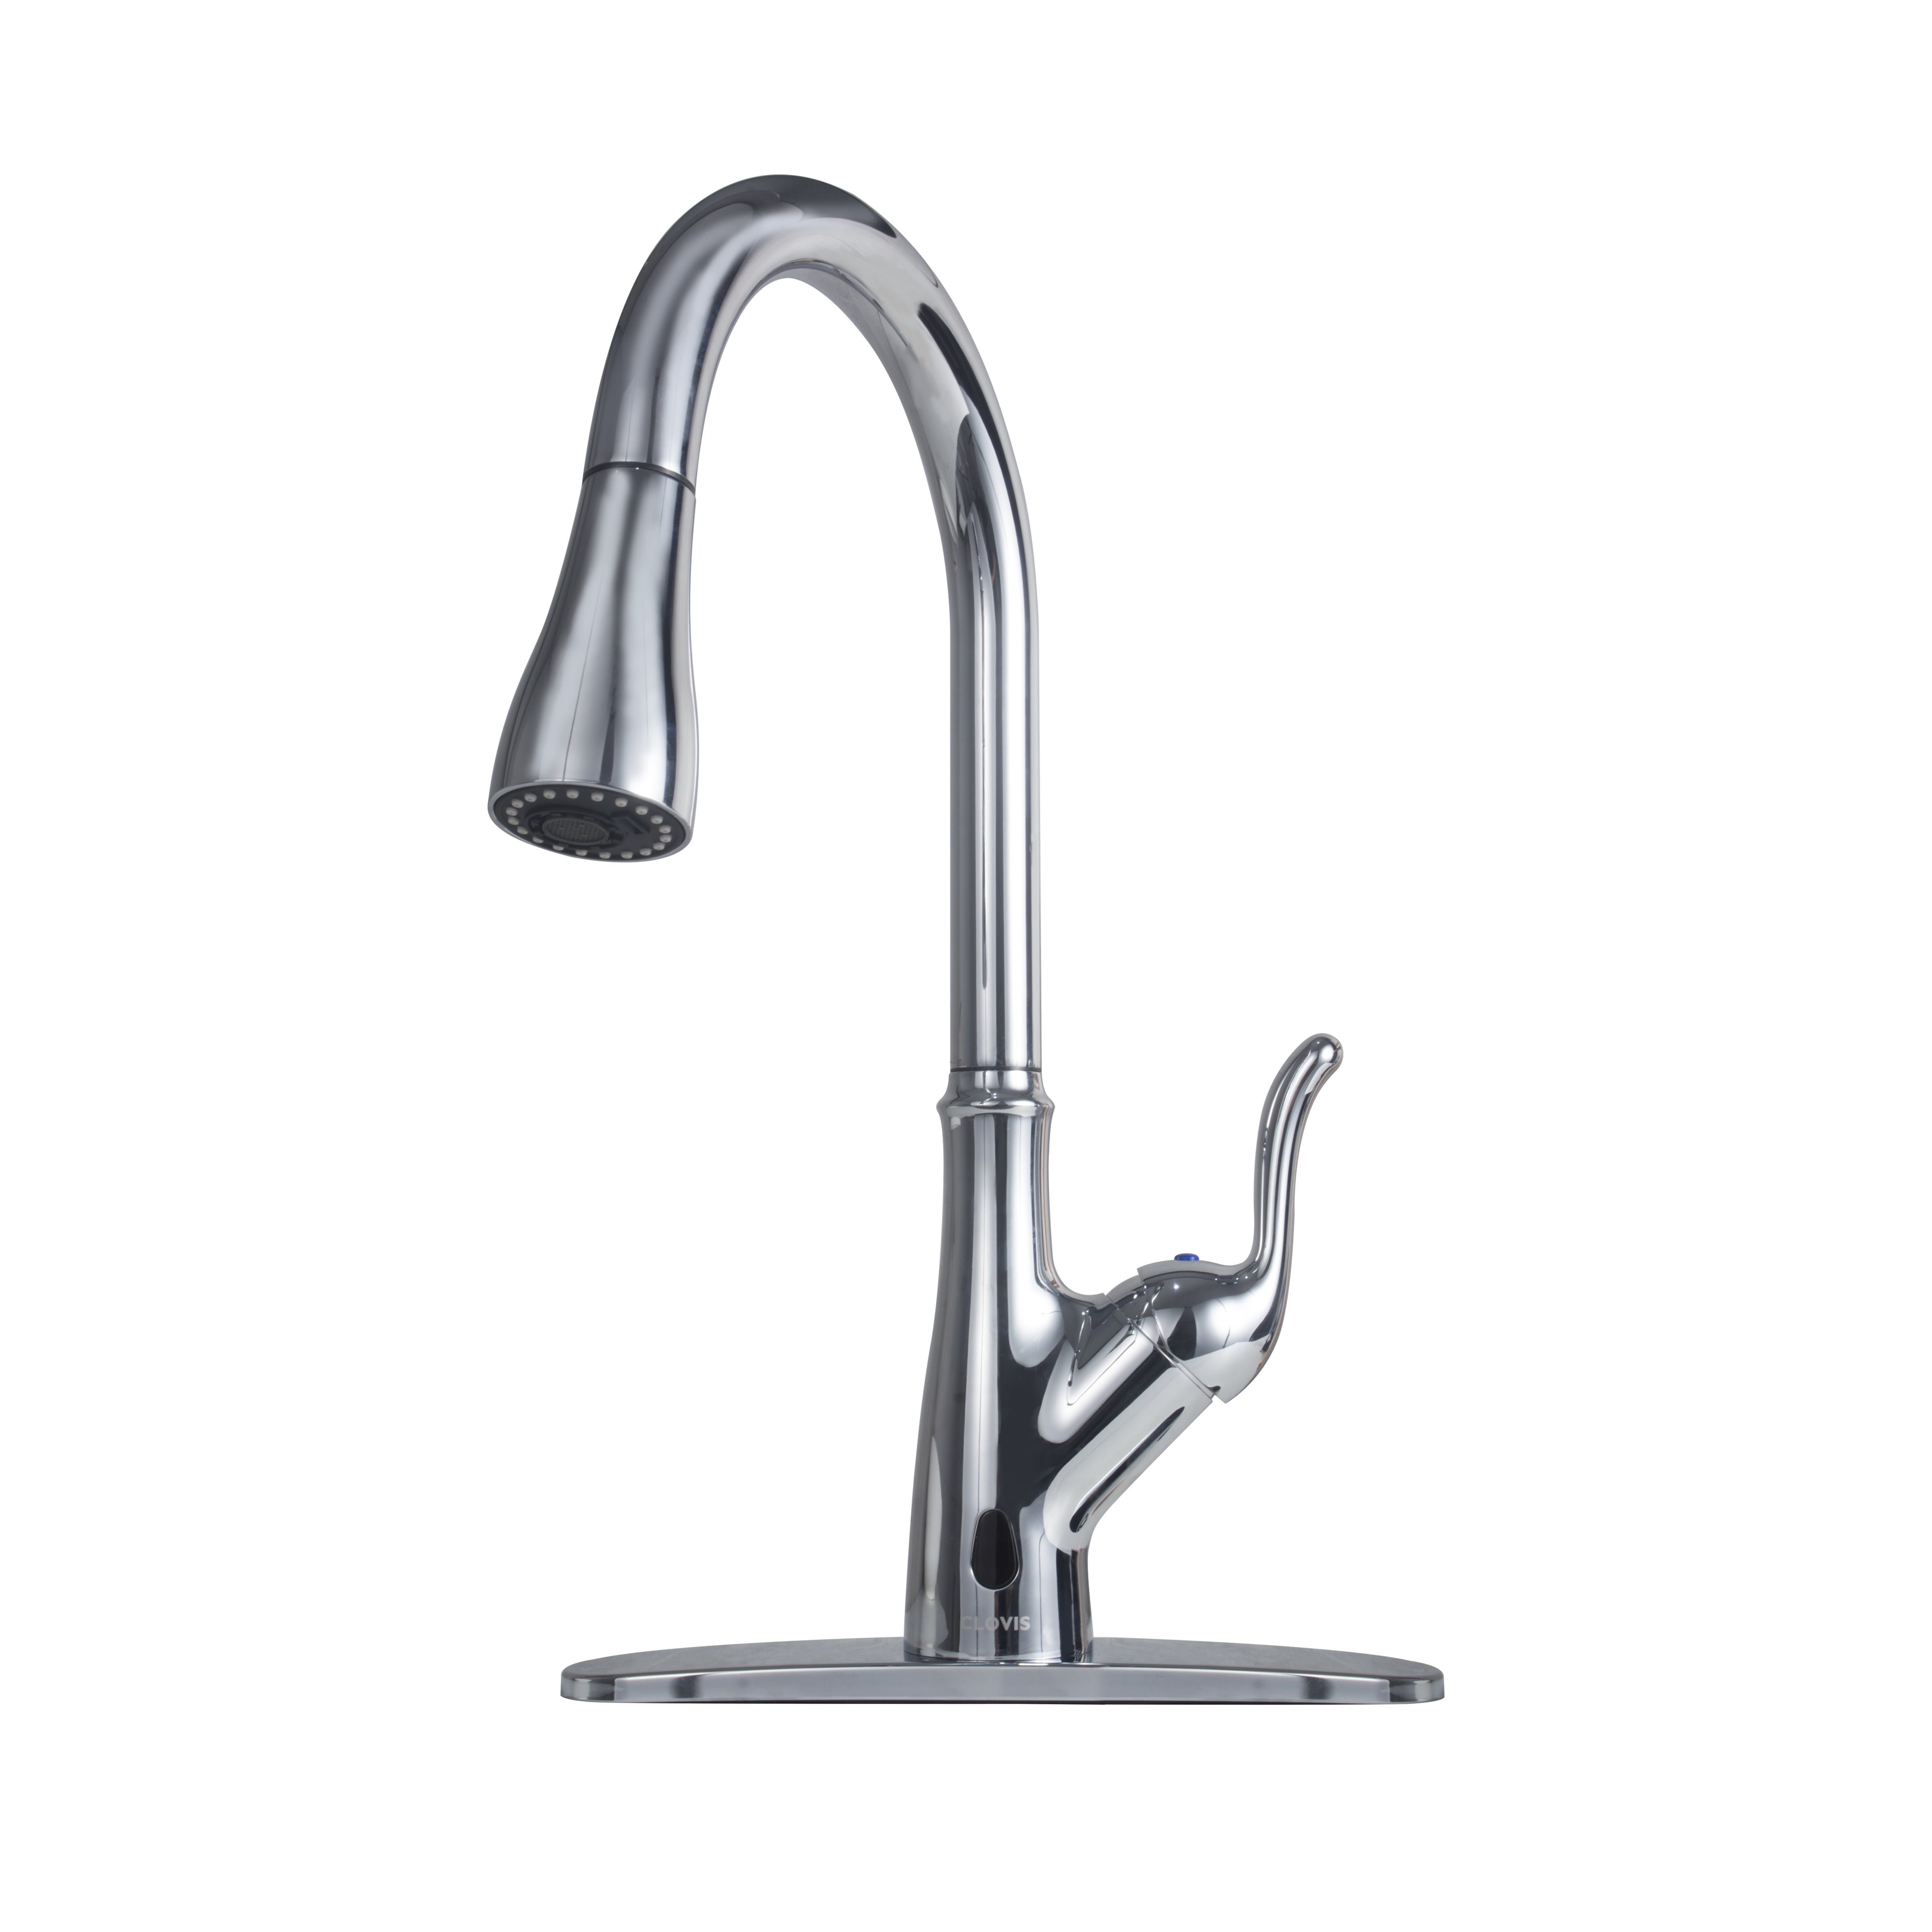 Details about  / Kitchen Sink Stainless Steel Faucet Single Hole Pull-down Brushed Nickel Sprayer